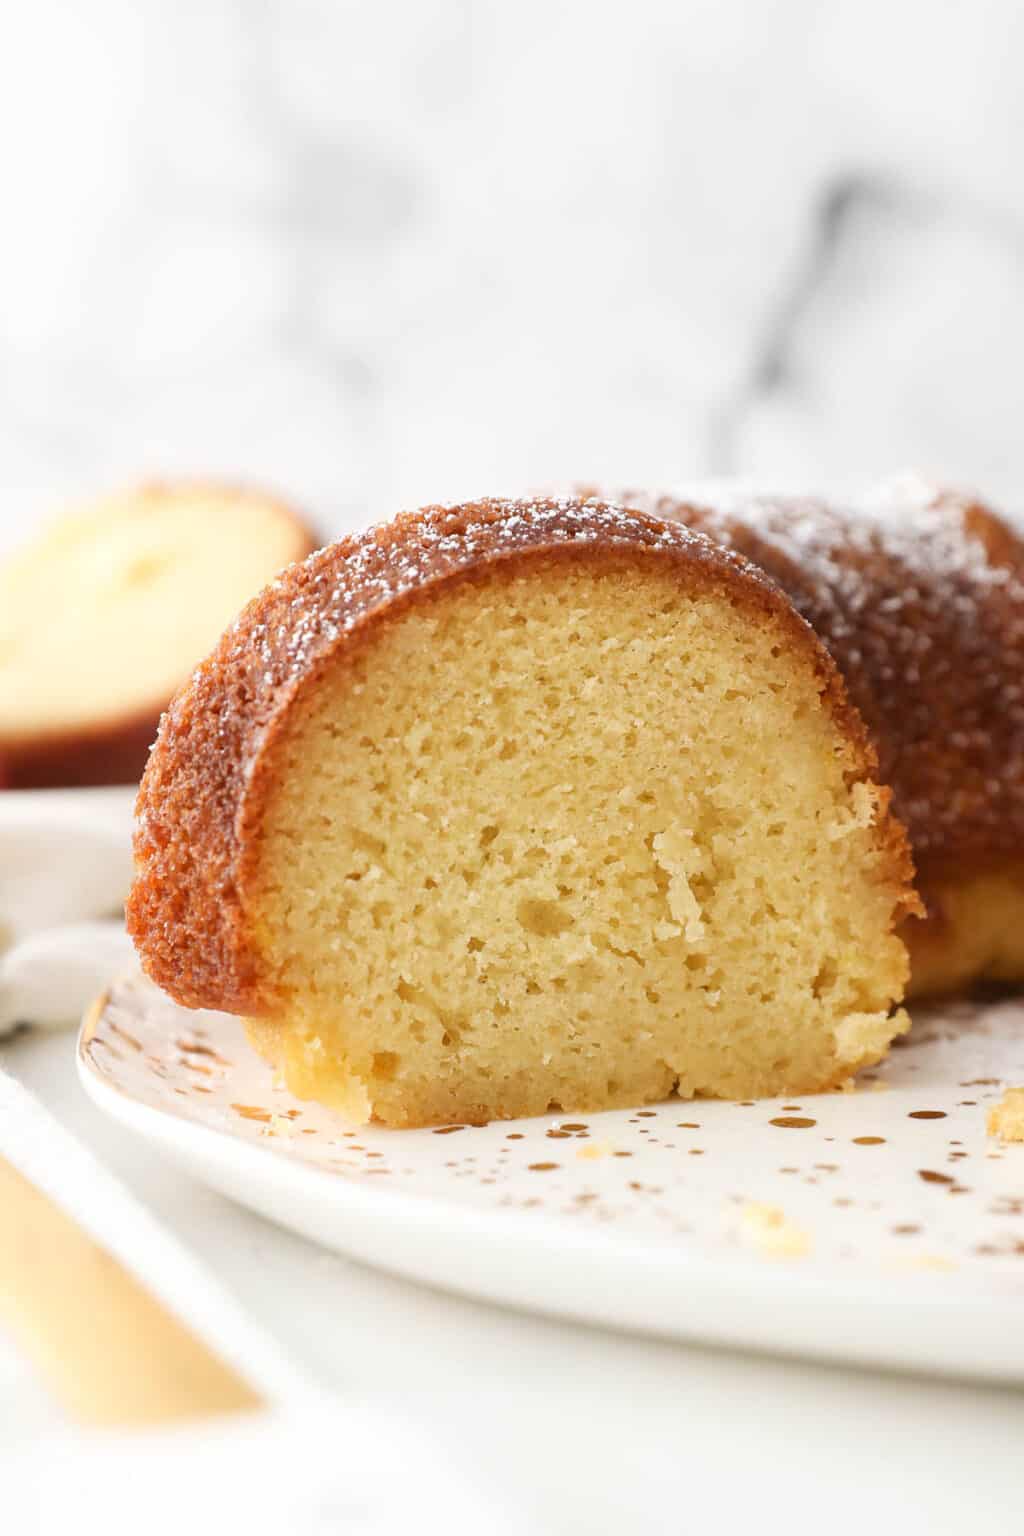 The Best Homemade Rum Cake | Beyond Frosting